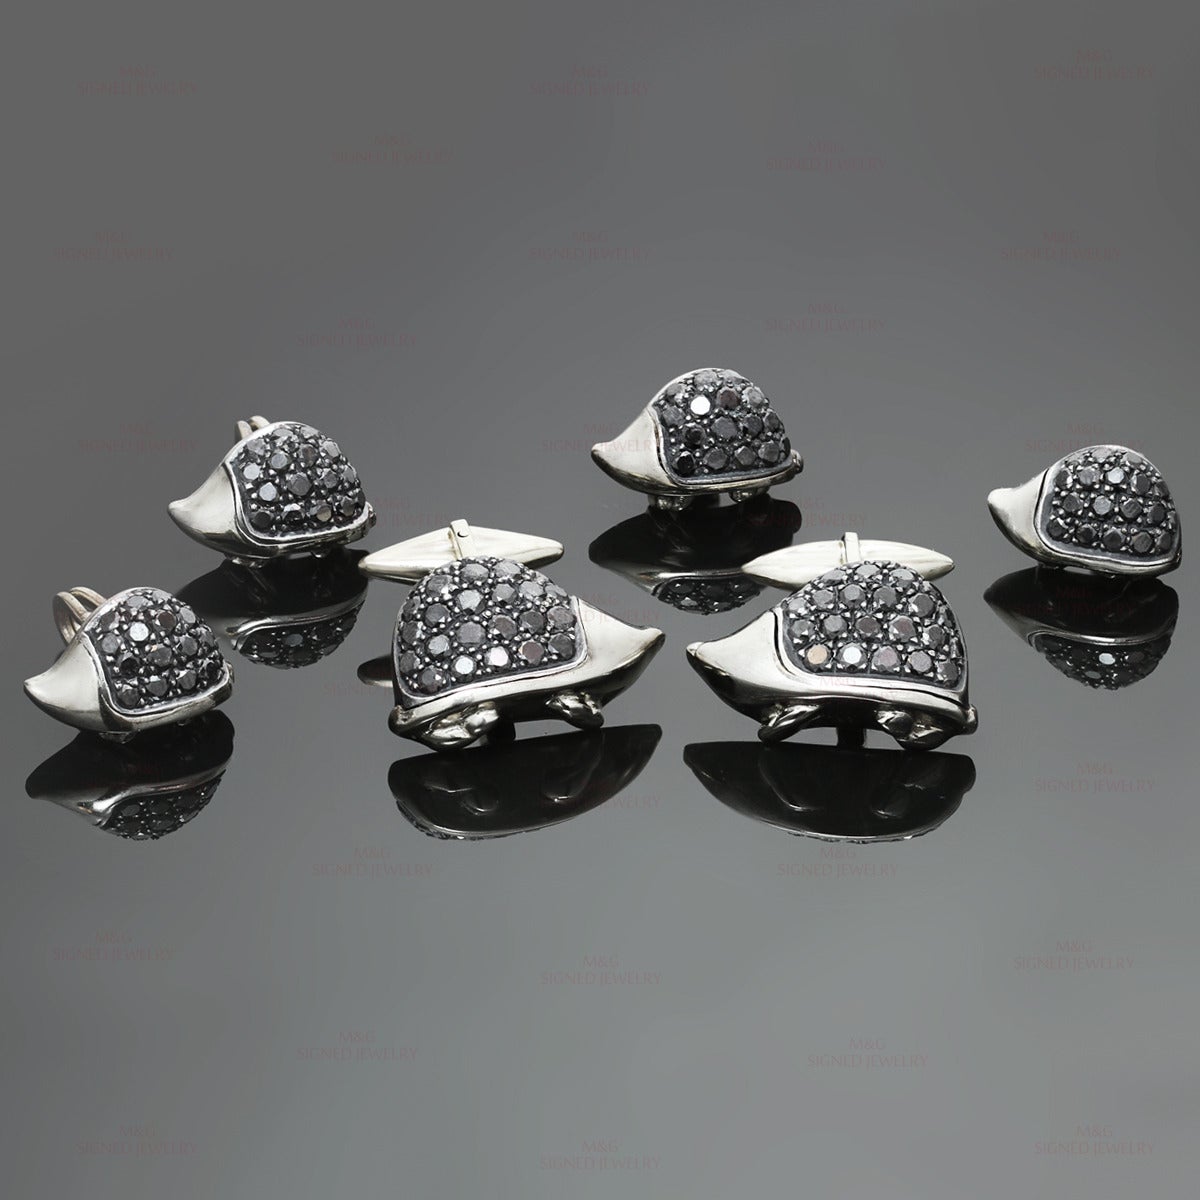 This fabulous De Grisogono cufflinks and studs set is crafted in 18k gold sterling silver in shape of porcupines/hedgehogs and elegantly set with black diamonds. Made in United States circa 1980s. Measurements: 0.43